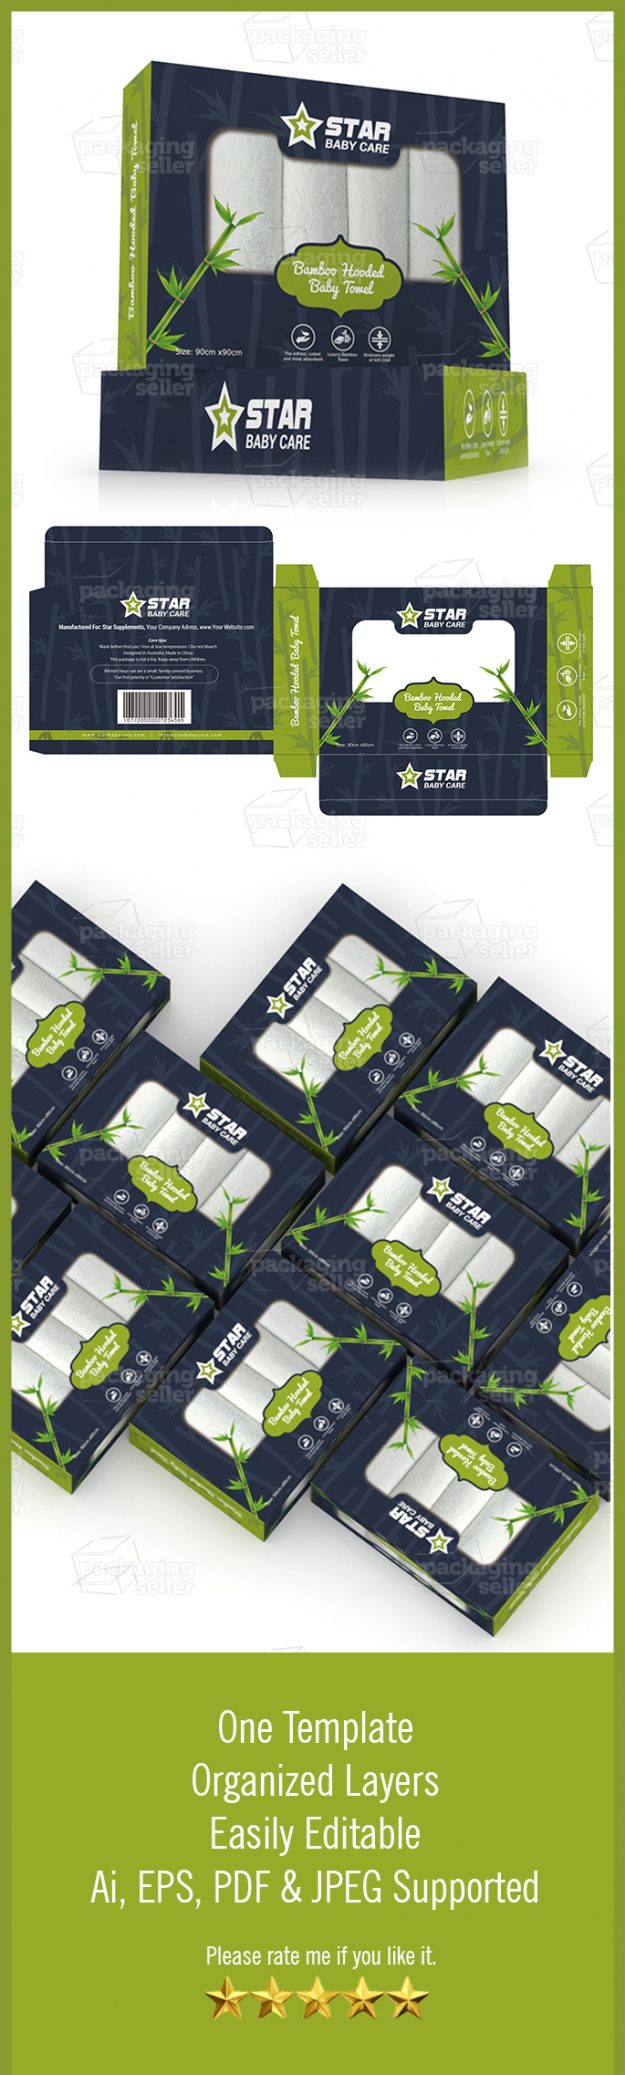 Bamboo Baby Towel Packaging Template Design